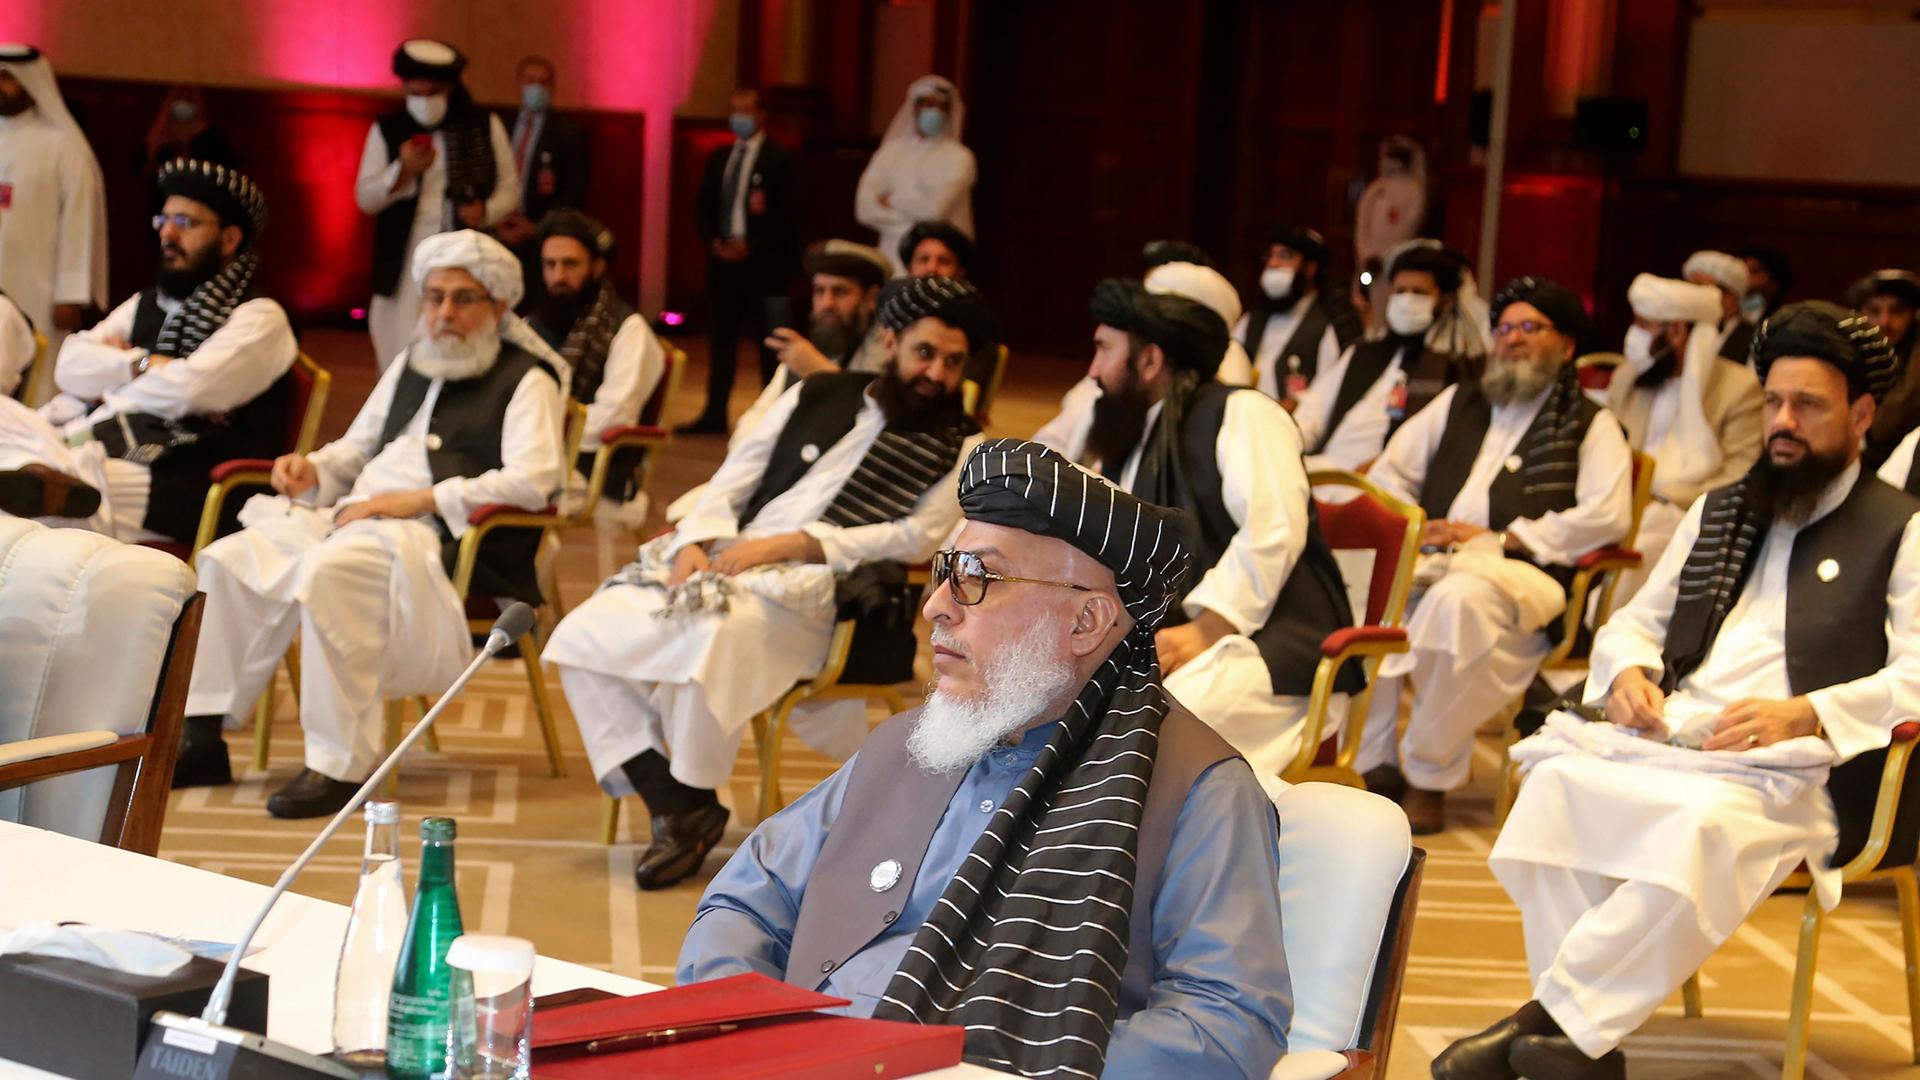 Several members of the Taliban negotiating delegation are shown seated in chairs spaced several feet from each other in a large room.